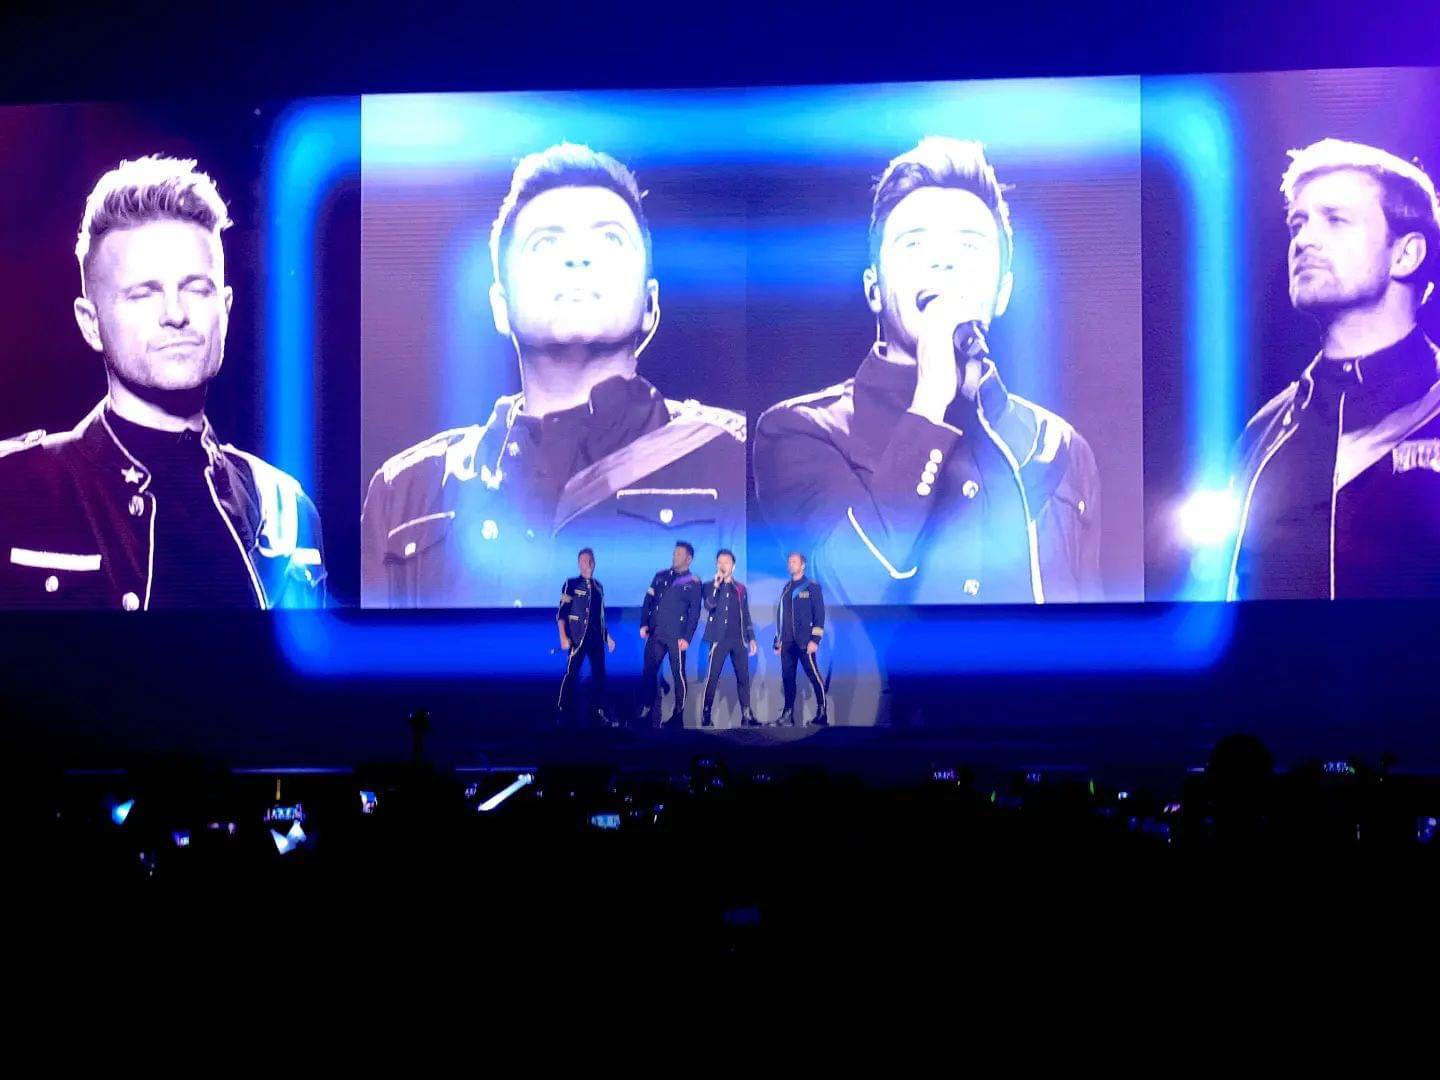 Westlife Returns to Manila for ‘Wild Dreams Tour’ in February